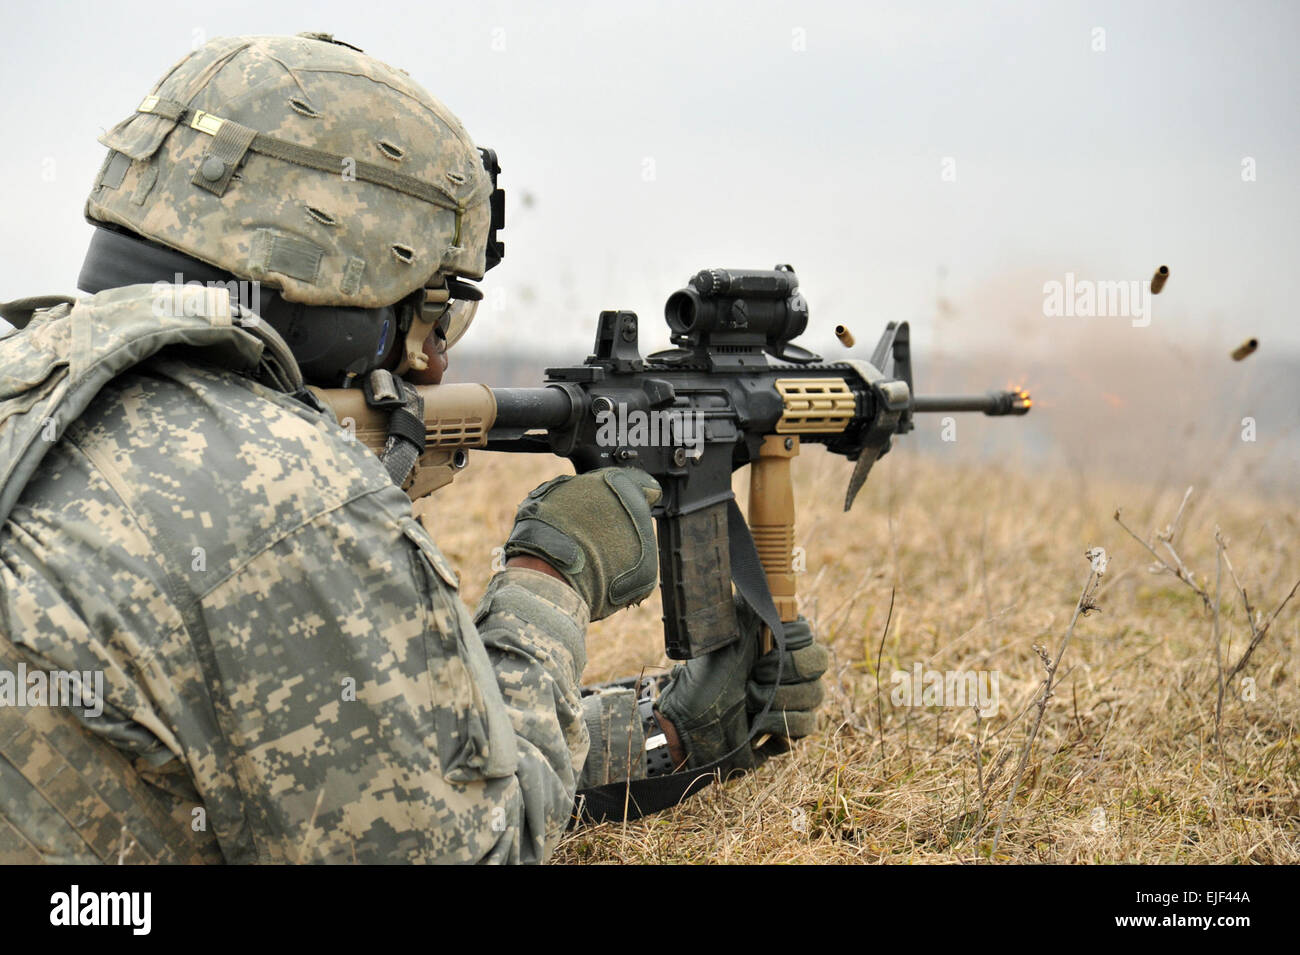 A U.S. Army paratrooper assigned to Company A, 173rd Airborne Brigade Special Troops Battalion engages a target during a combined defensive live-fire exercise March 6, 2015, at the 7th Army Joint Multinational Training Command in Grafenwoehr, Germany. Paratroopers from the 173rd Airborne Brigade and Dutch sappers from the 411th Armored Engineers of the Royal Dutch Army participated in the combined defensive exercise to promote interoperability and strengthen the NATO alliance.  Visual Information Specialist Markus Rauchenberger/released Stock Photo